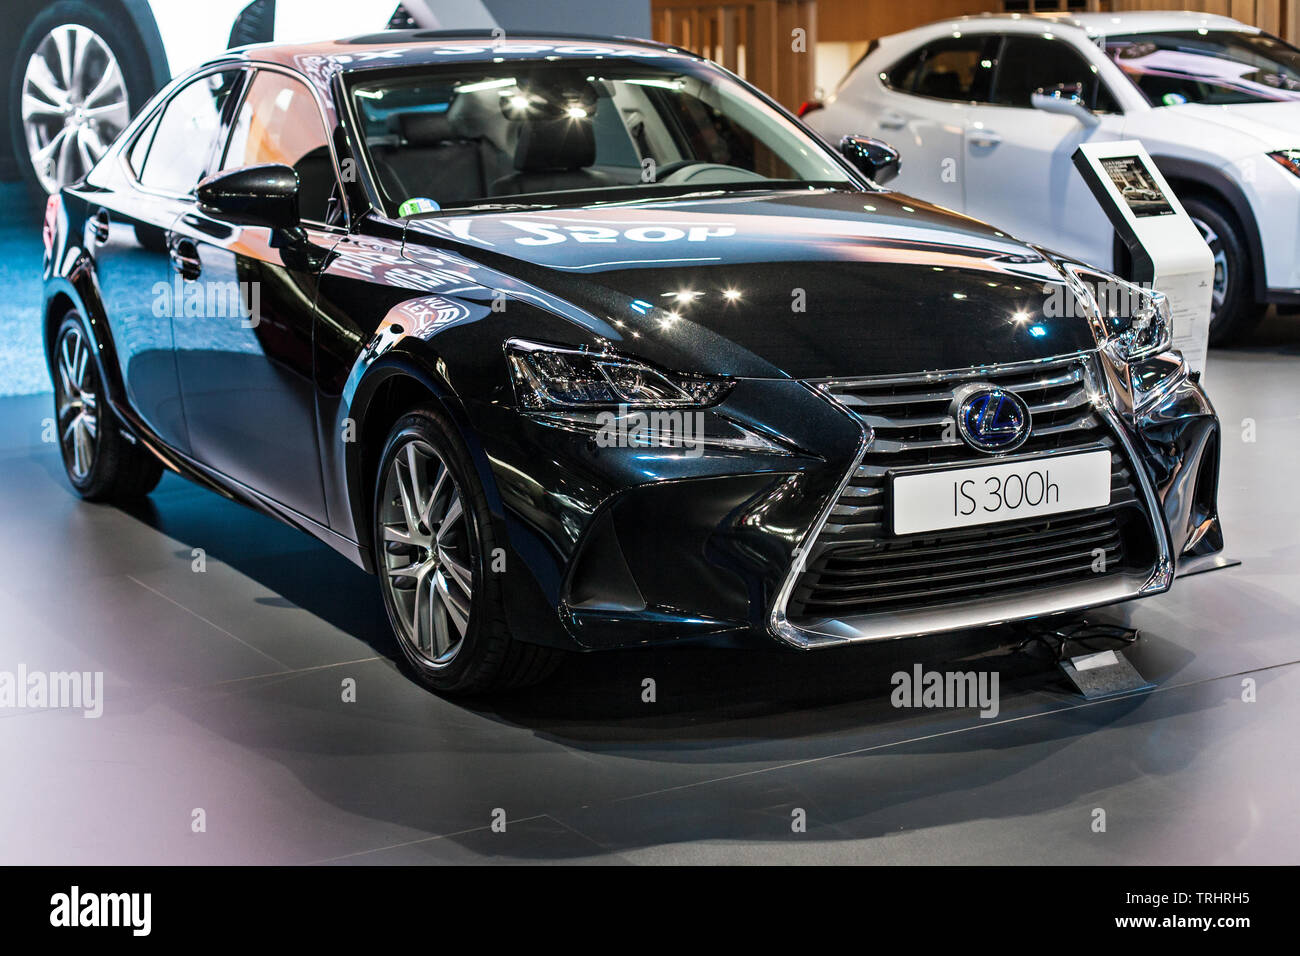 Barcelona, Spain - May 19, 2019: Lexus IS 300h showcased at Automobile Barcelona 2019. Stock Photo